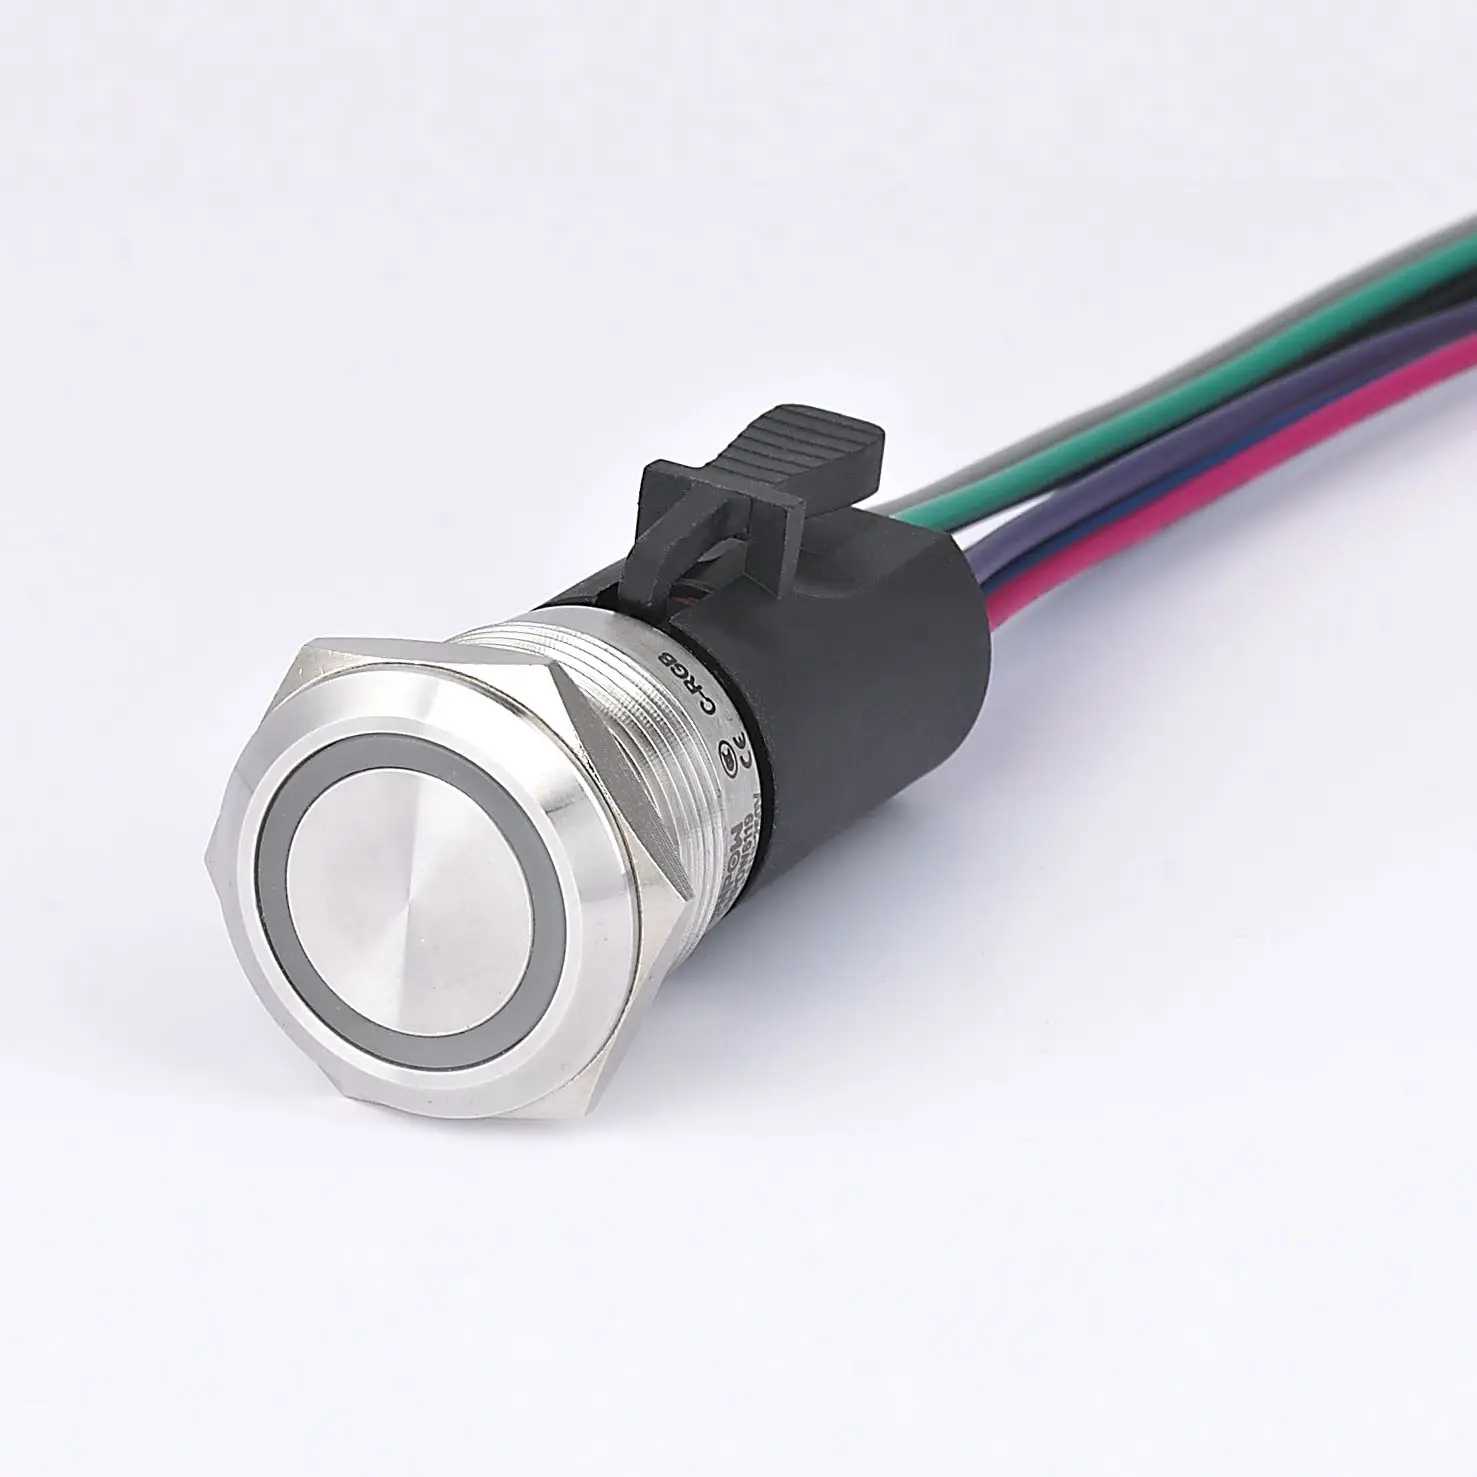 16/19/22 mm momentary latching illuminated metal push button switch panel mount with connector for boat car motorcycle